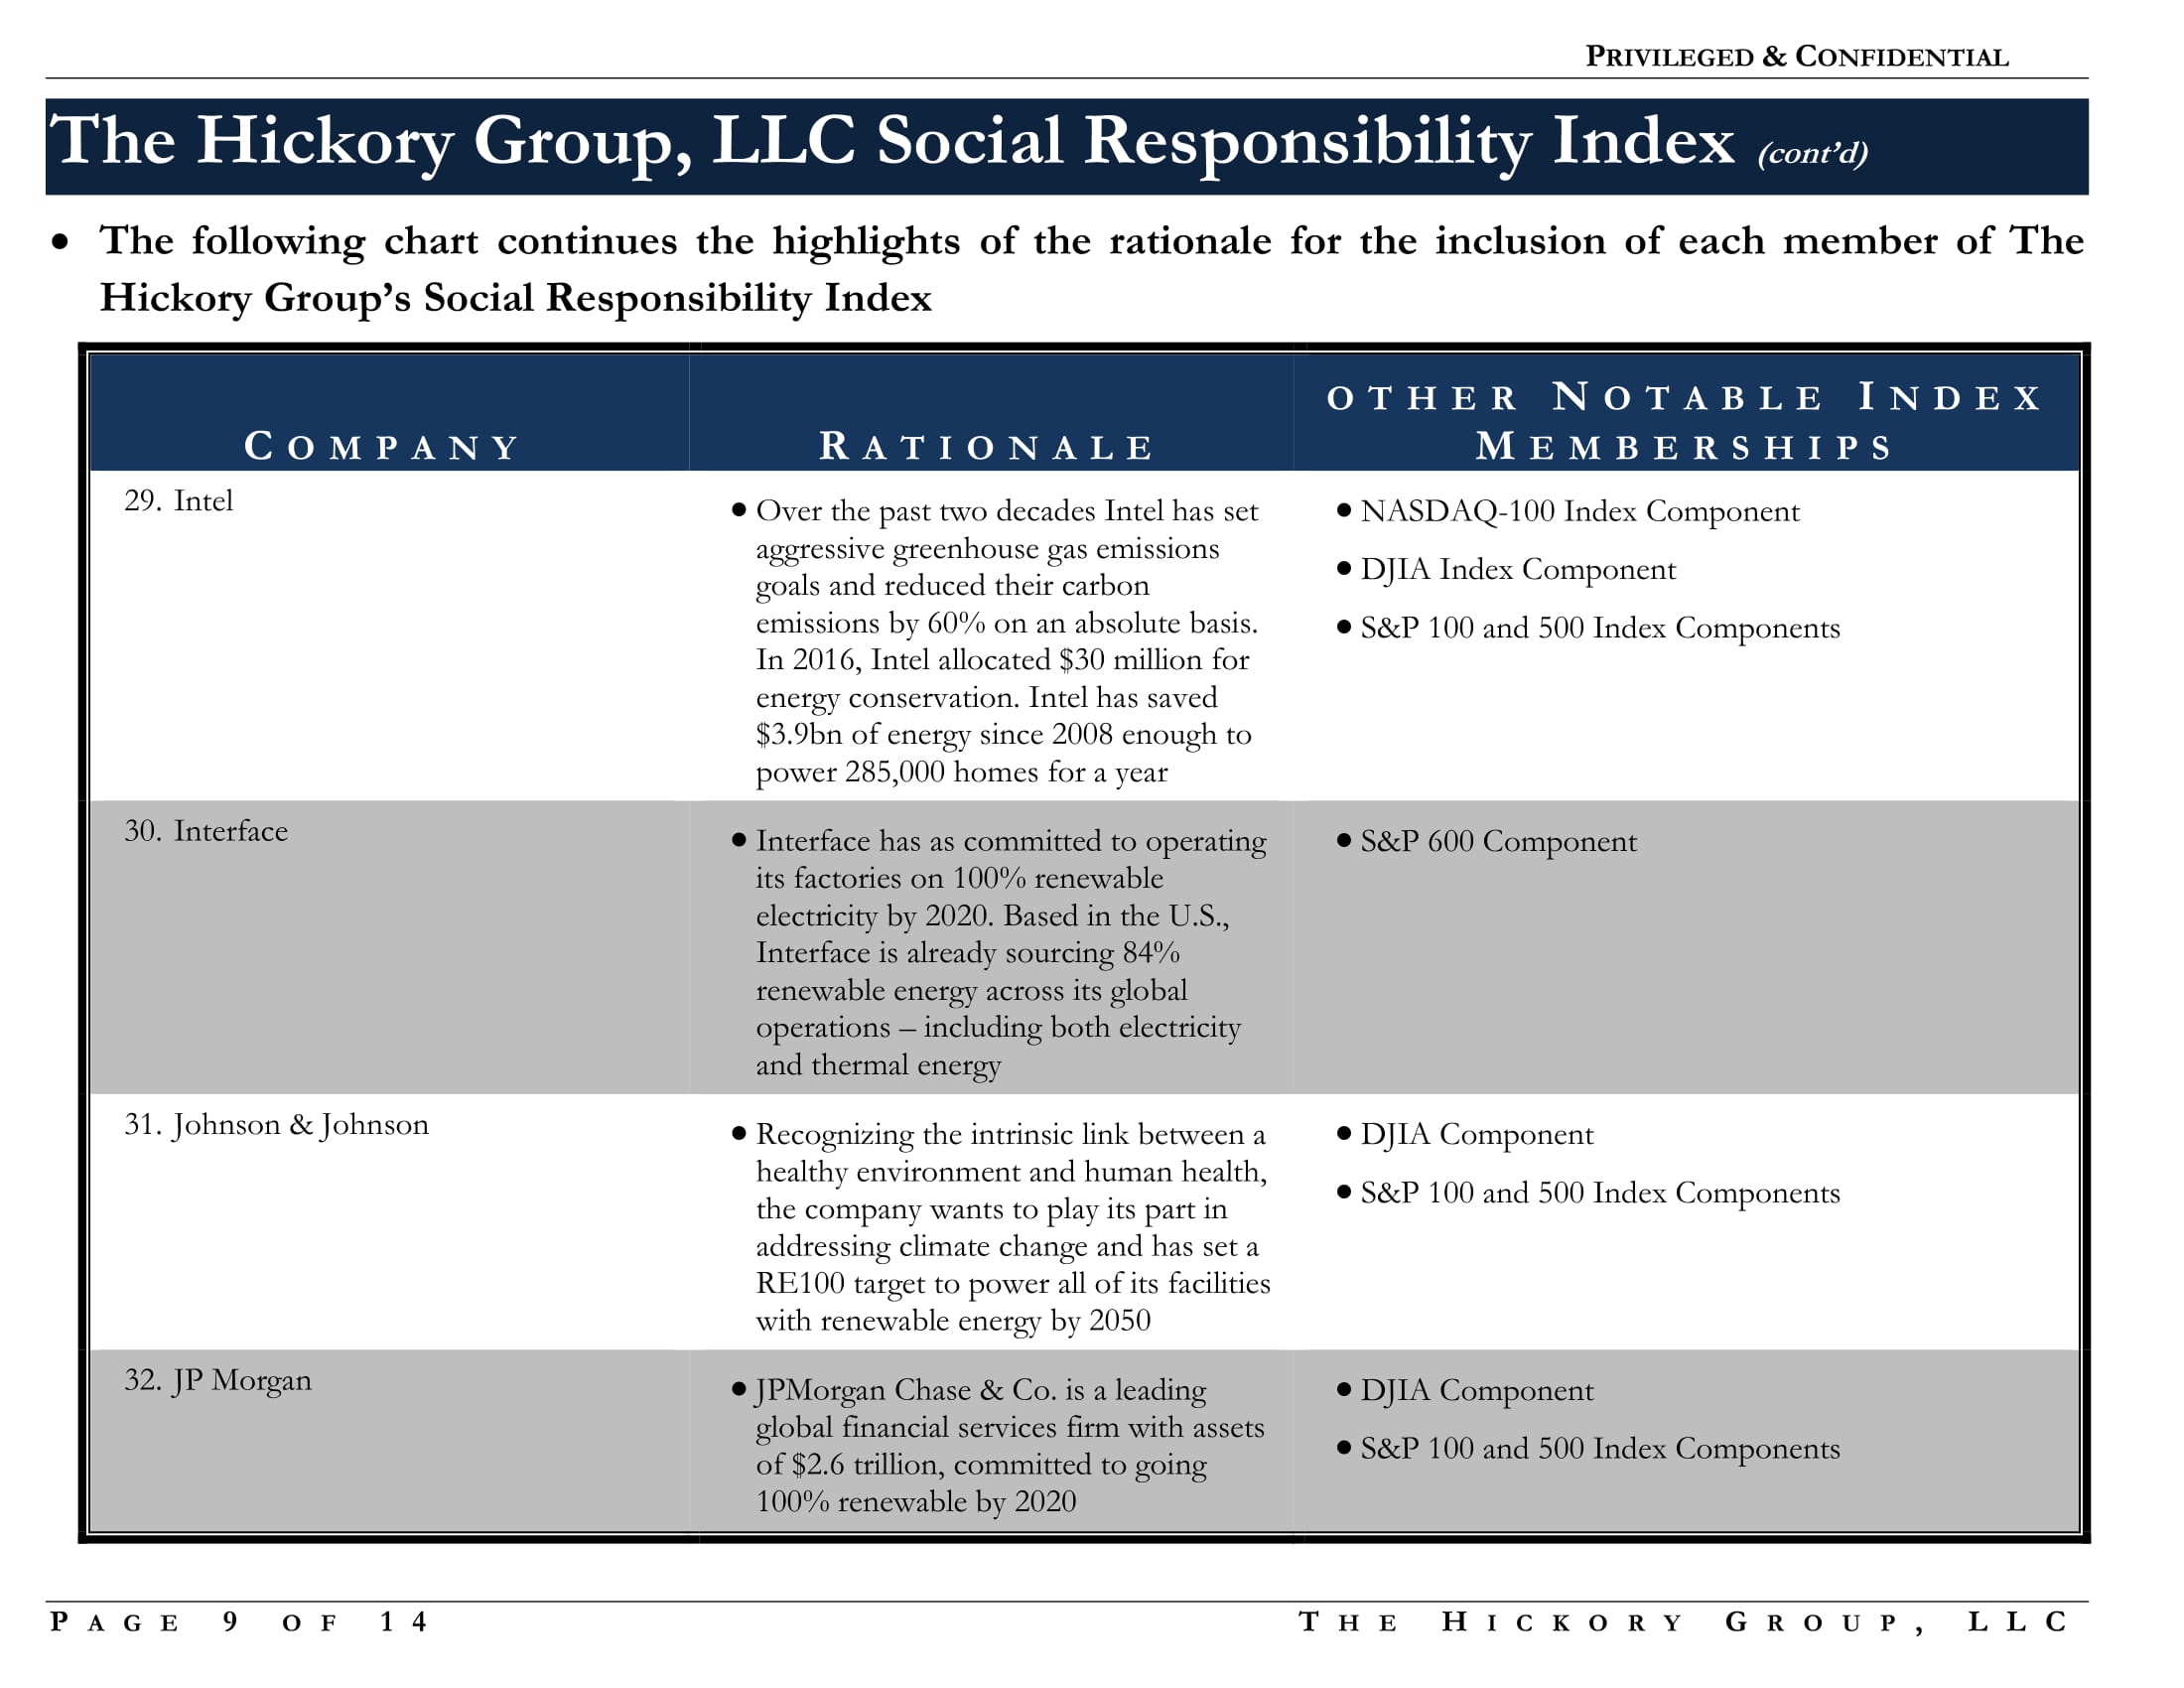 FINAL Social Responsibility Index  Notes and Rationale (7 October 2017) Privileged and Confidential-09.jpg